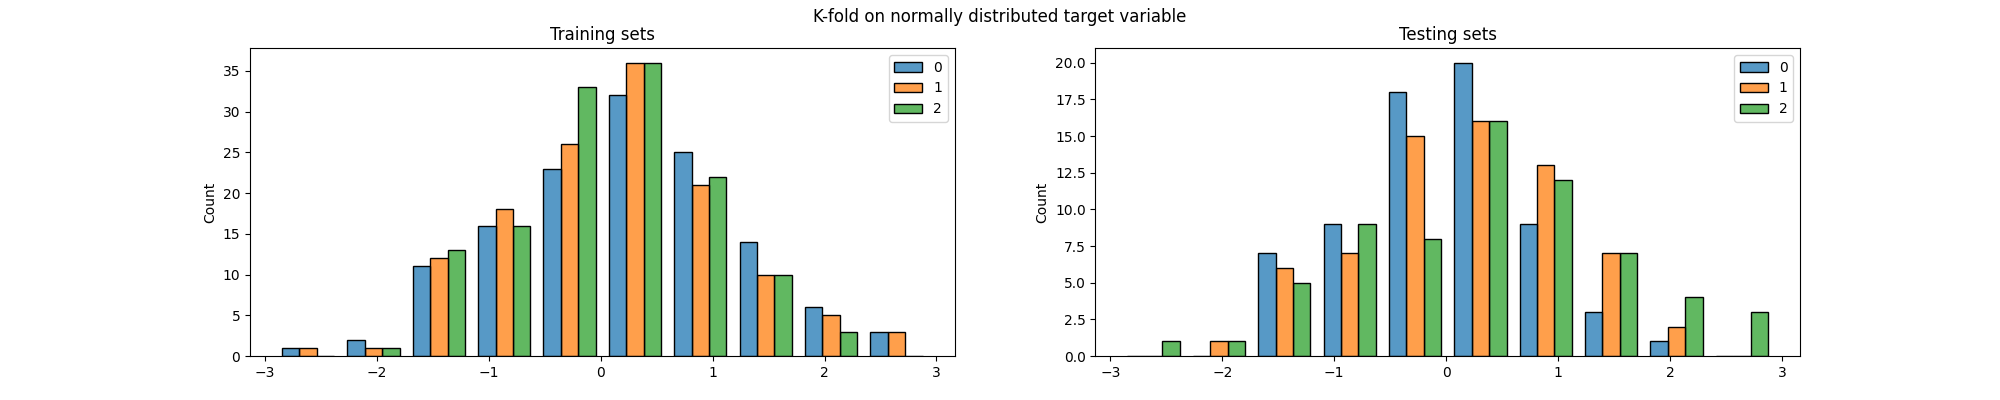 K-fold on normally distributed target variable, Training sets, Testing sets